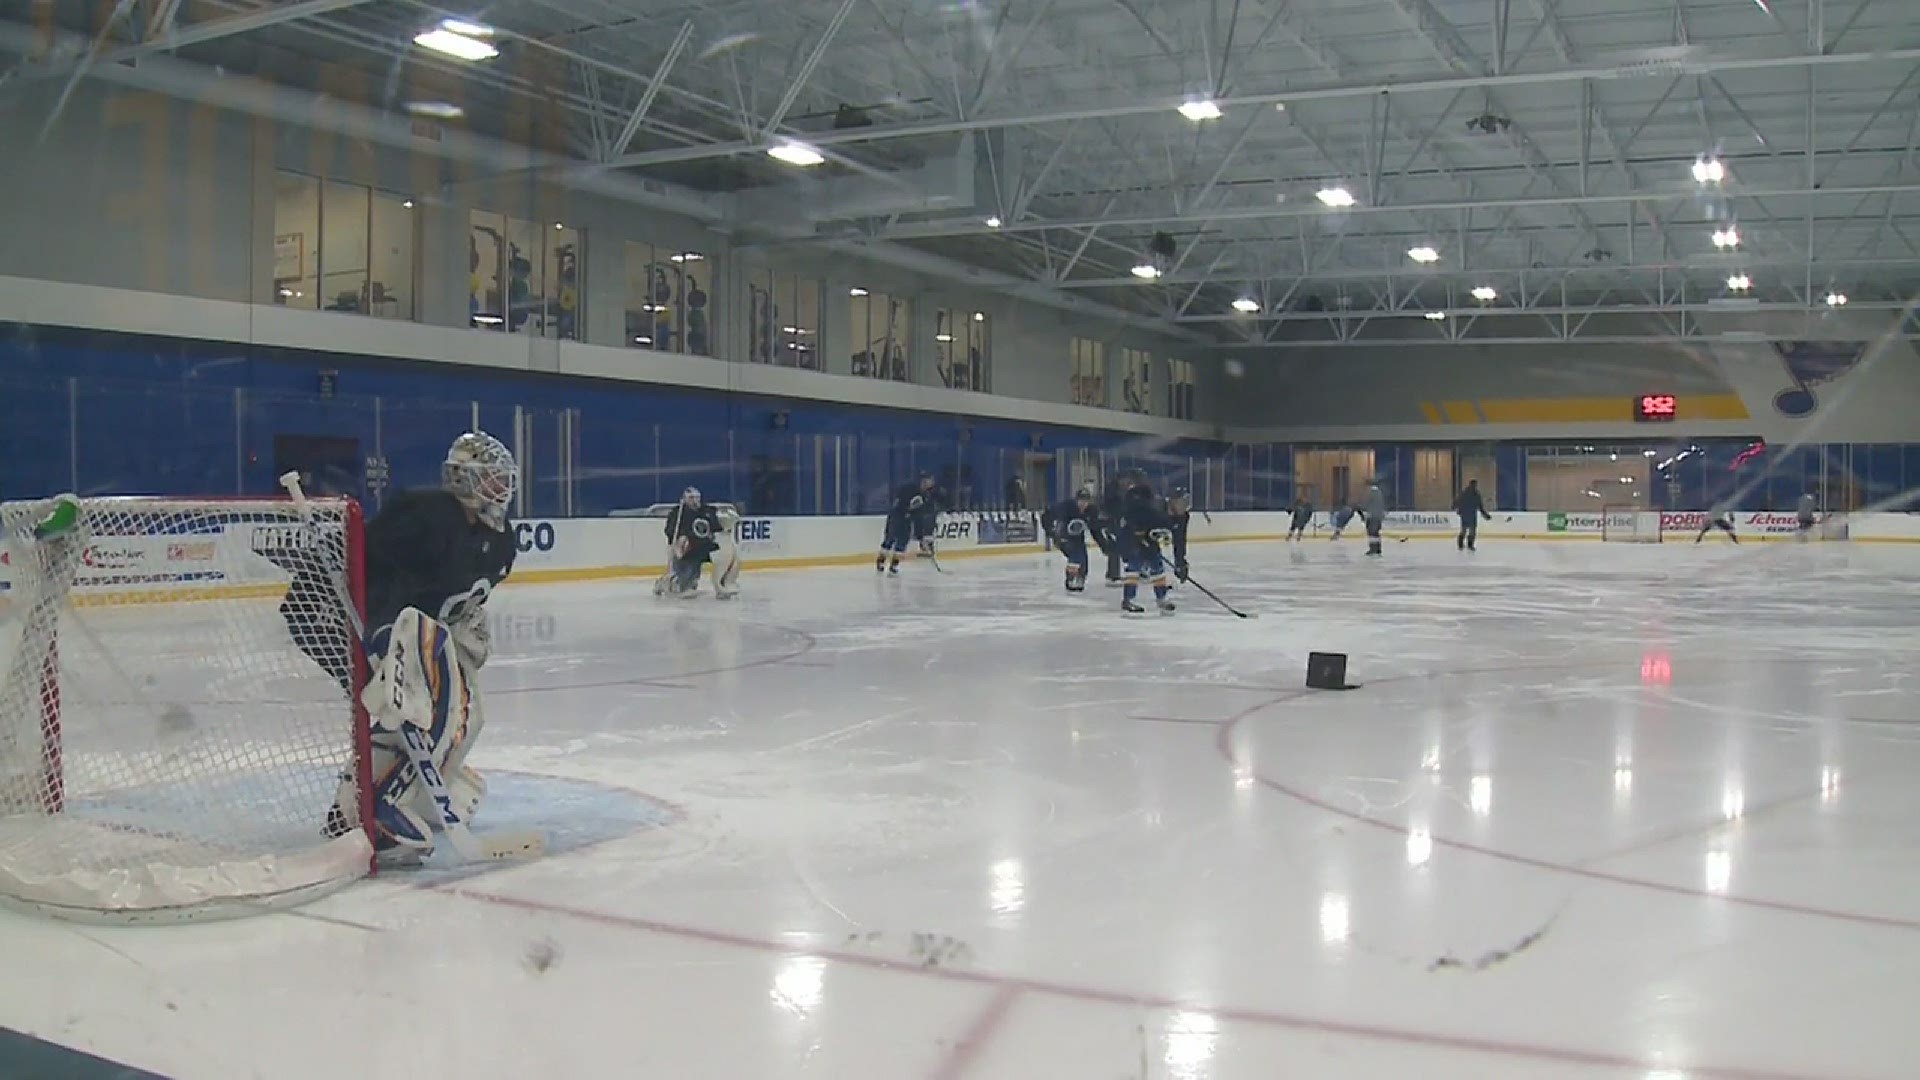 If you've been missing hockey like we have, this could be just what you need. The sights and sounds of the Blues returning to practice ahead of the NHL restart.